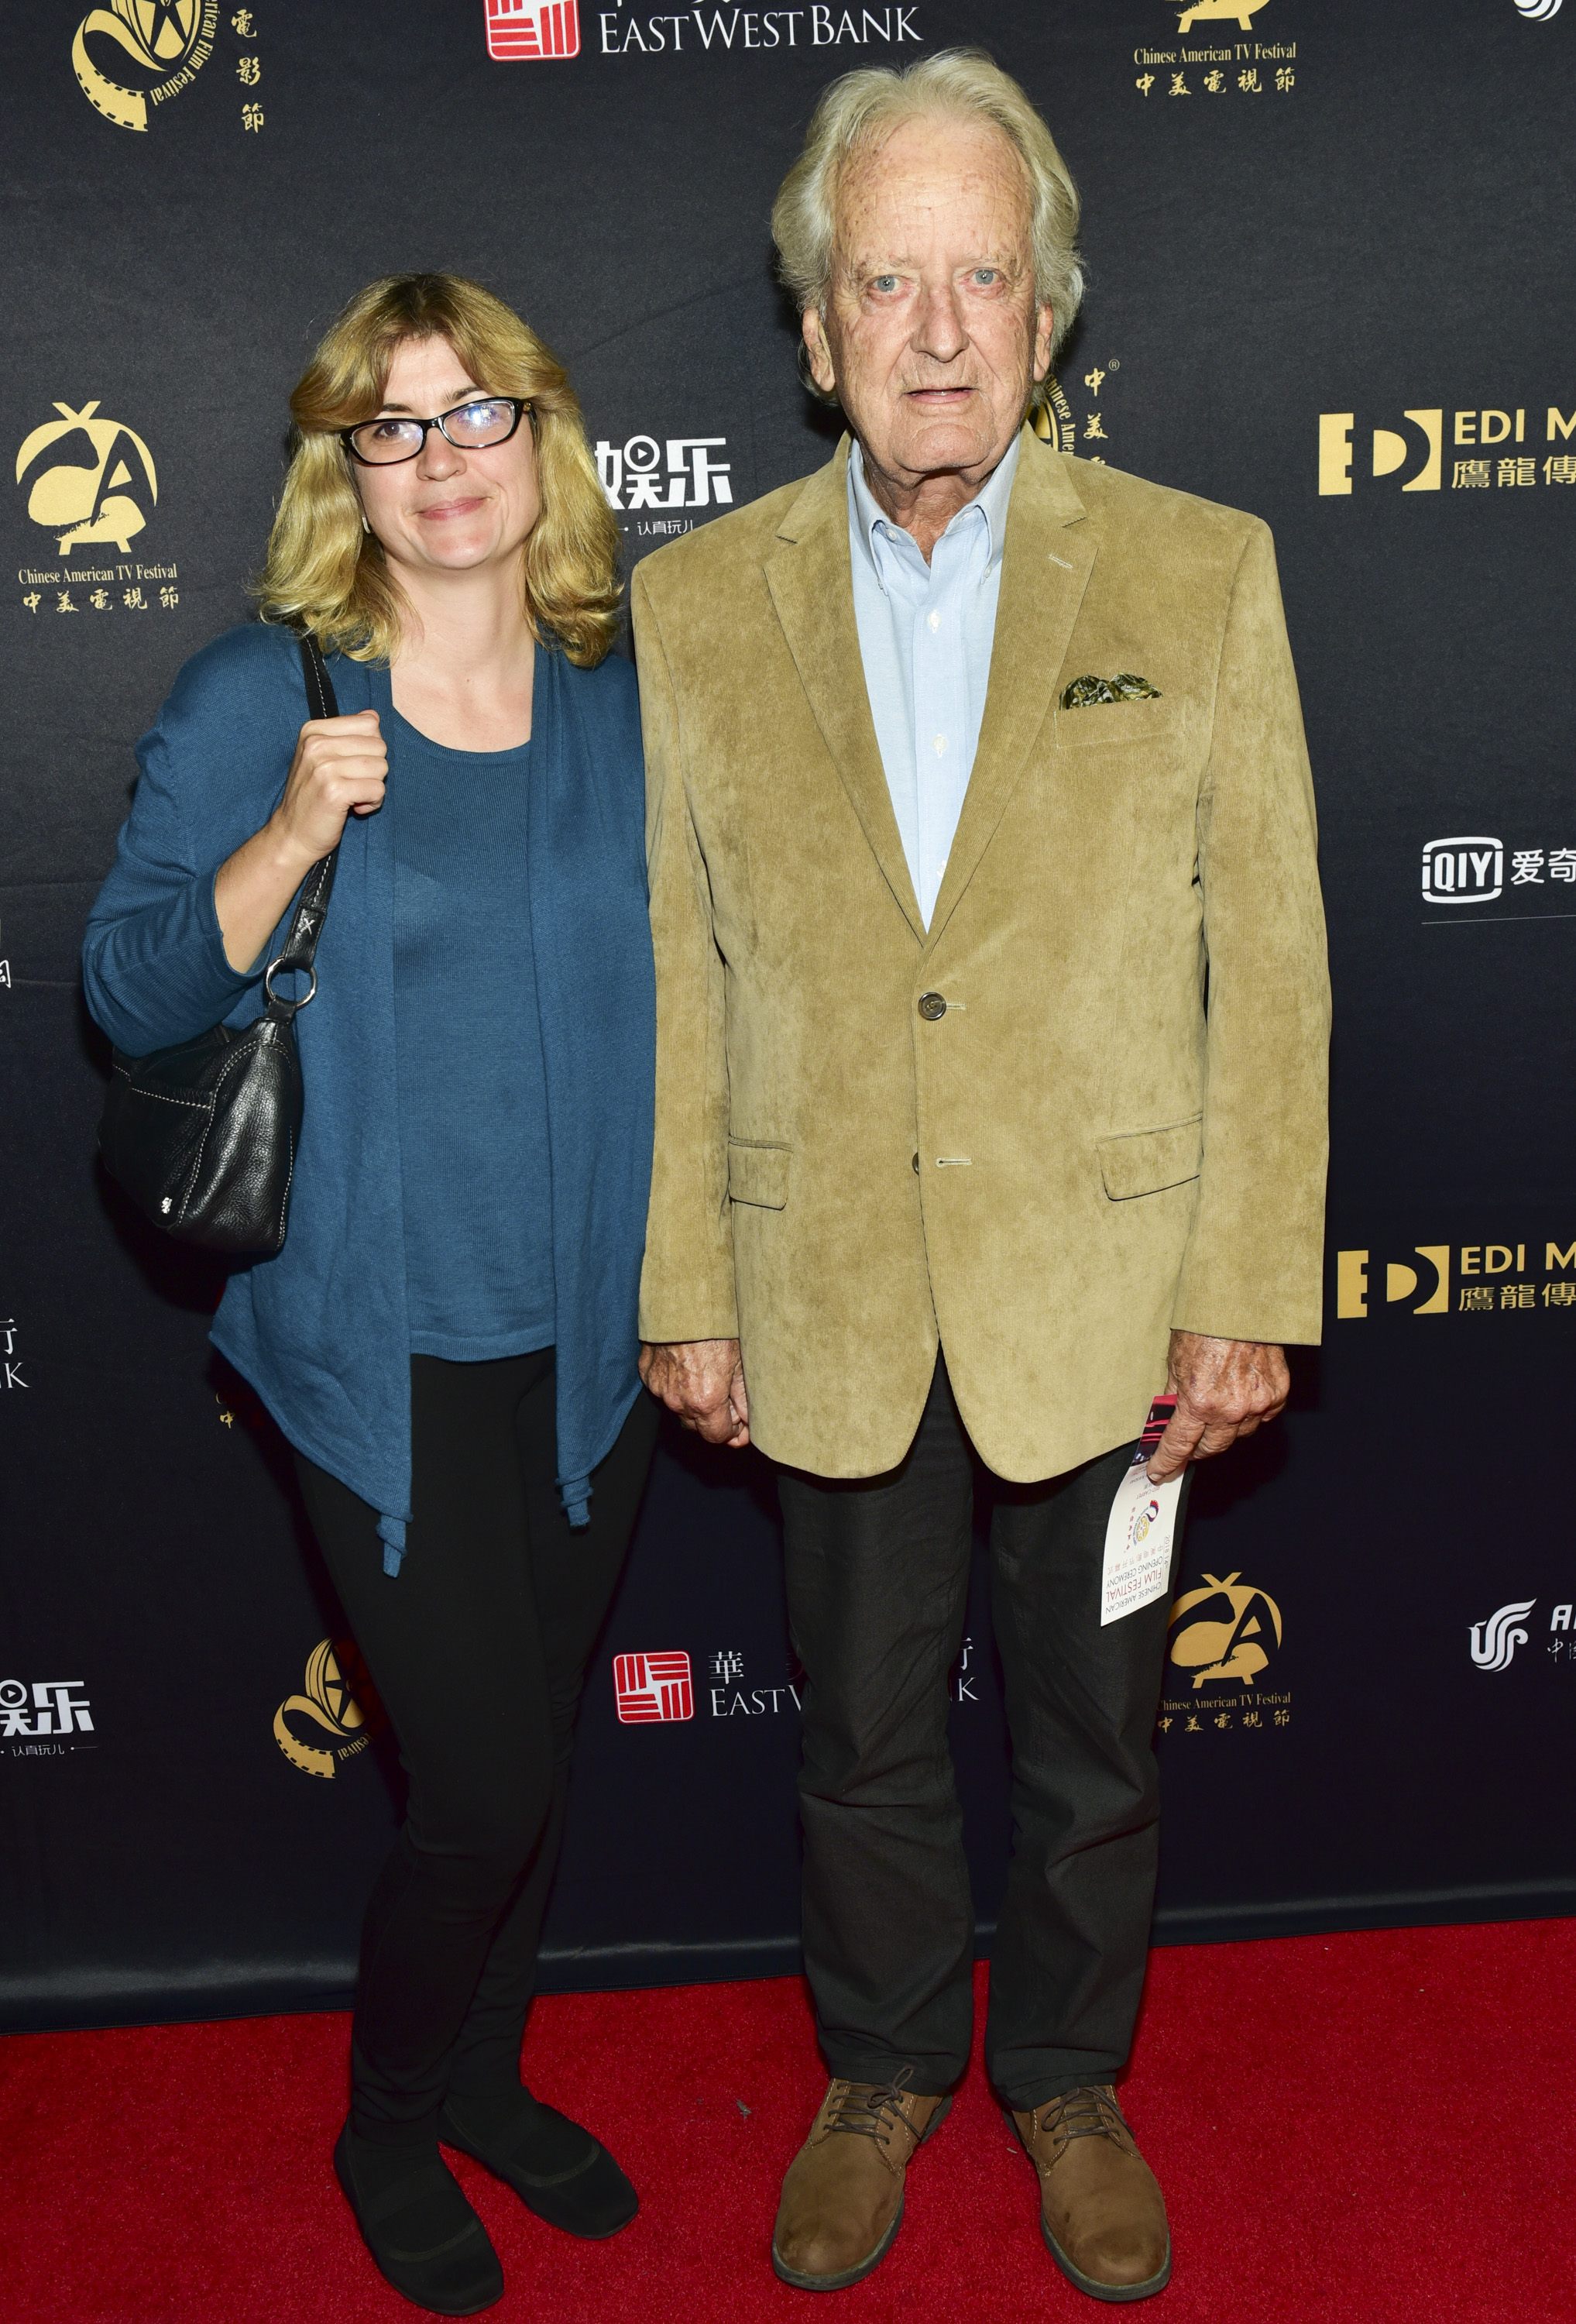 Beth Pantel and Nicolas Coster attend the Chinese American Film Festival Opening Ceremony and Golden Angel Awards Ceremony in Hollywood, California, on October 30, 2018. | Source: Getty Images